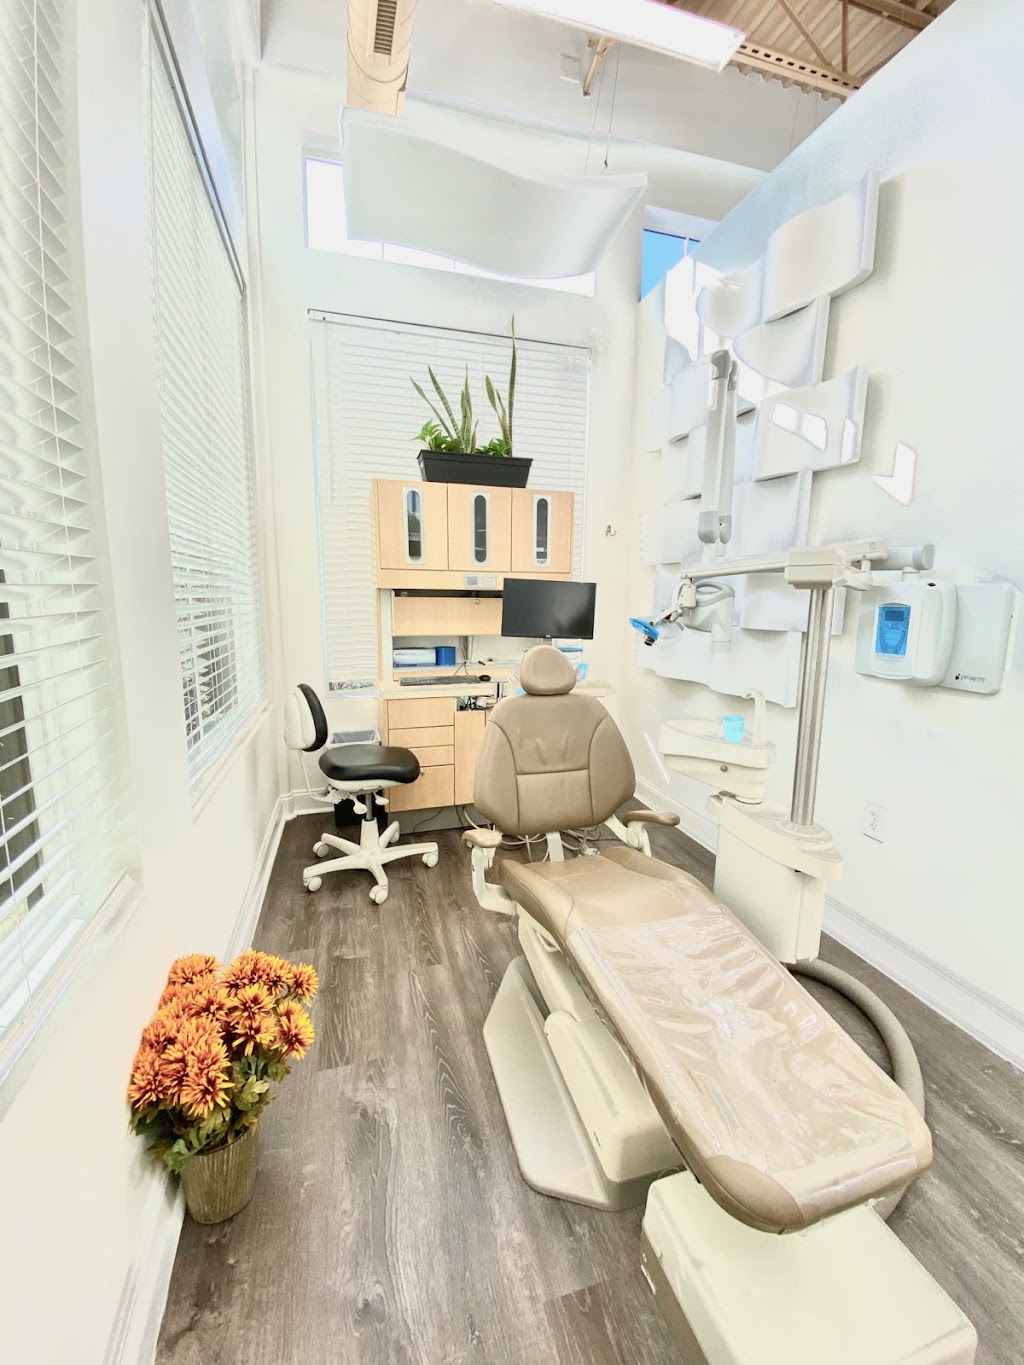 Sycamore Street Dental | 258 N Sycamore St, Newtown, PA 18940 | Phone: (215) 794-2500